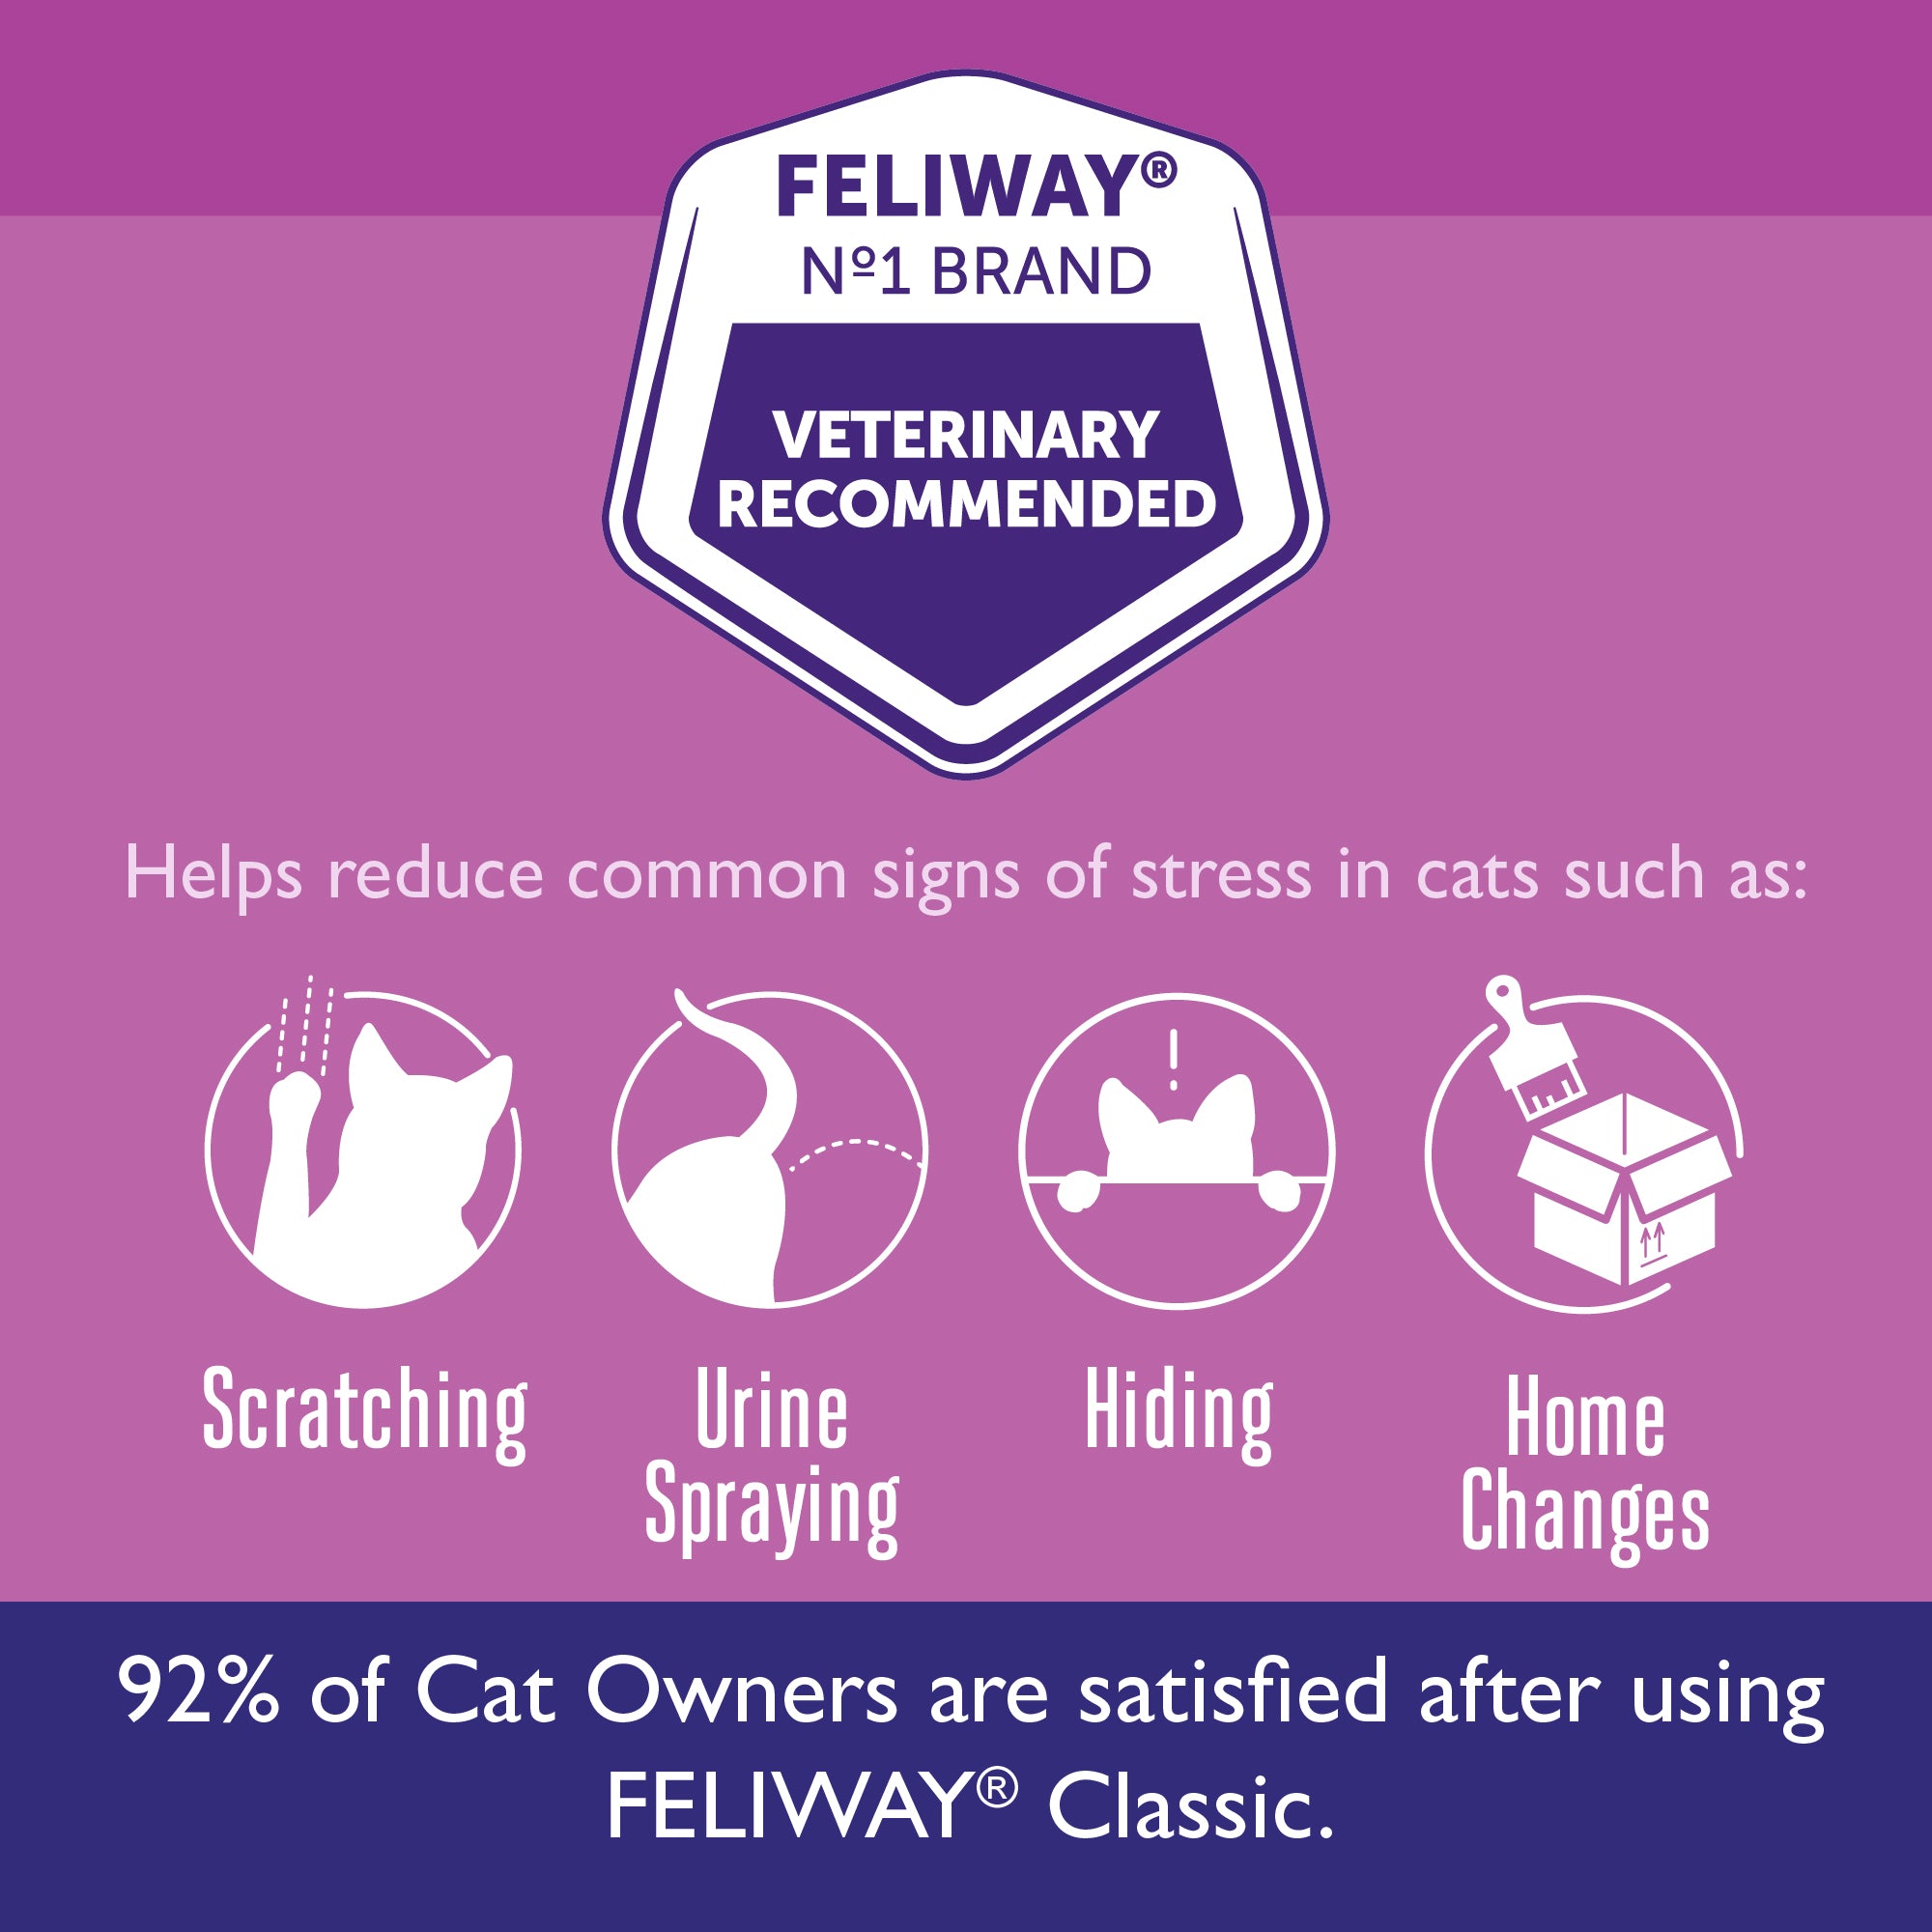 Feliway Friends 30 Days Calming Starter Kit with Plug in Diffuser and  Refill 48ml